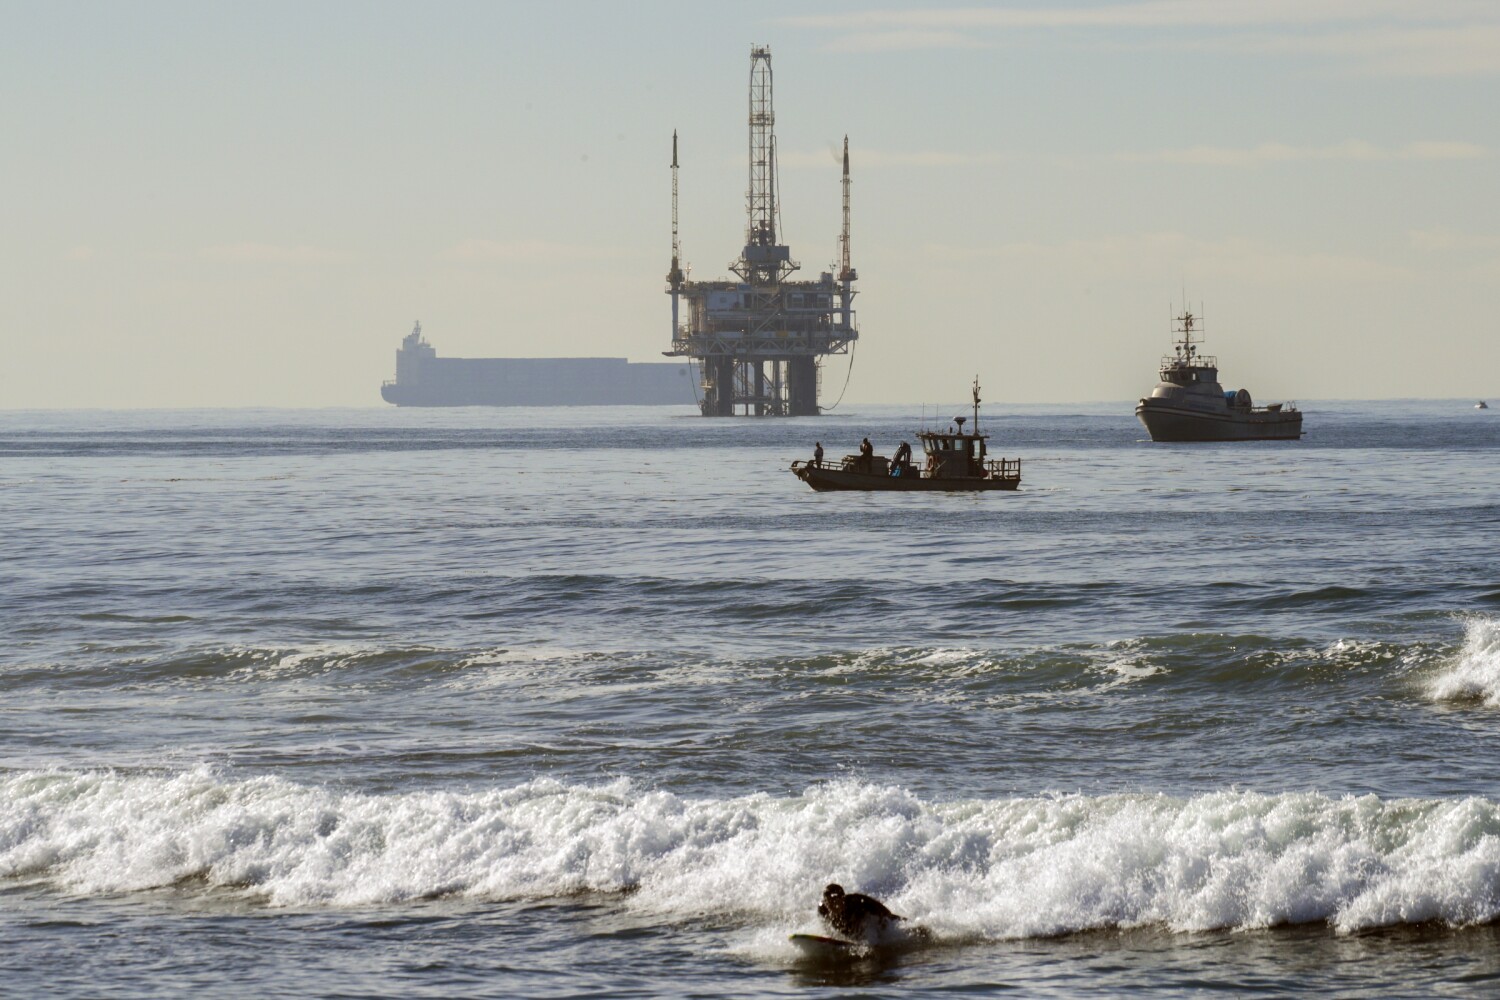 Oil sheen confirmed off Huntington Beach as charges are filed in earlier spill